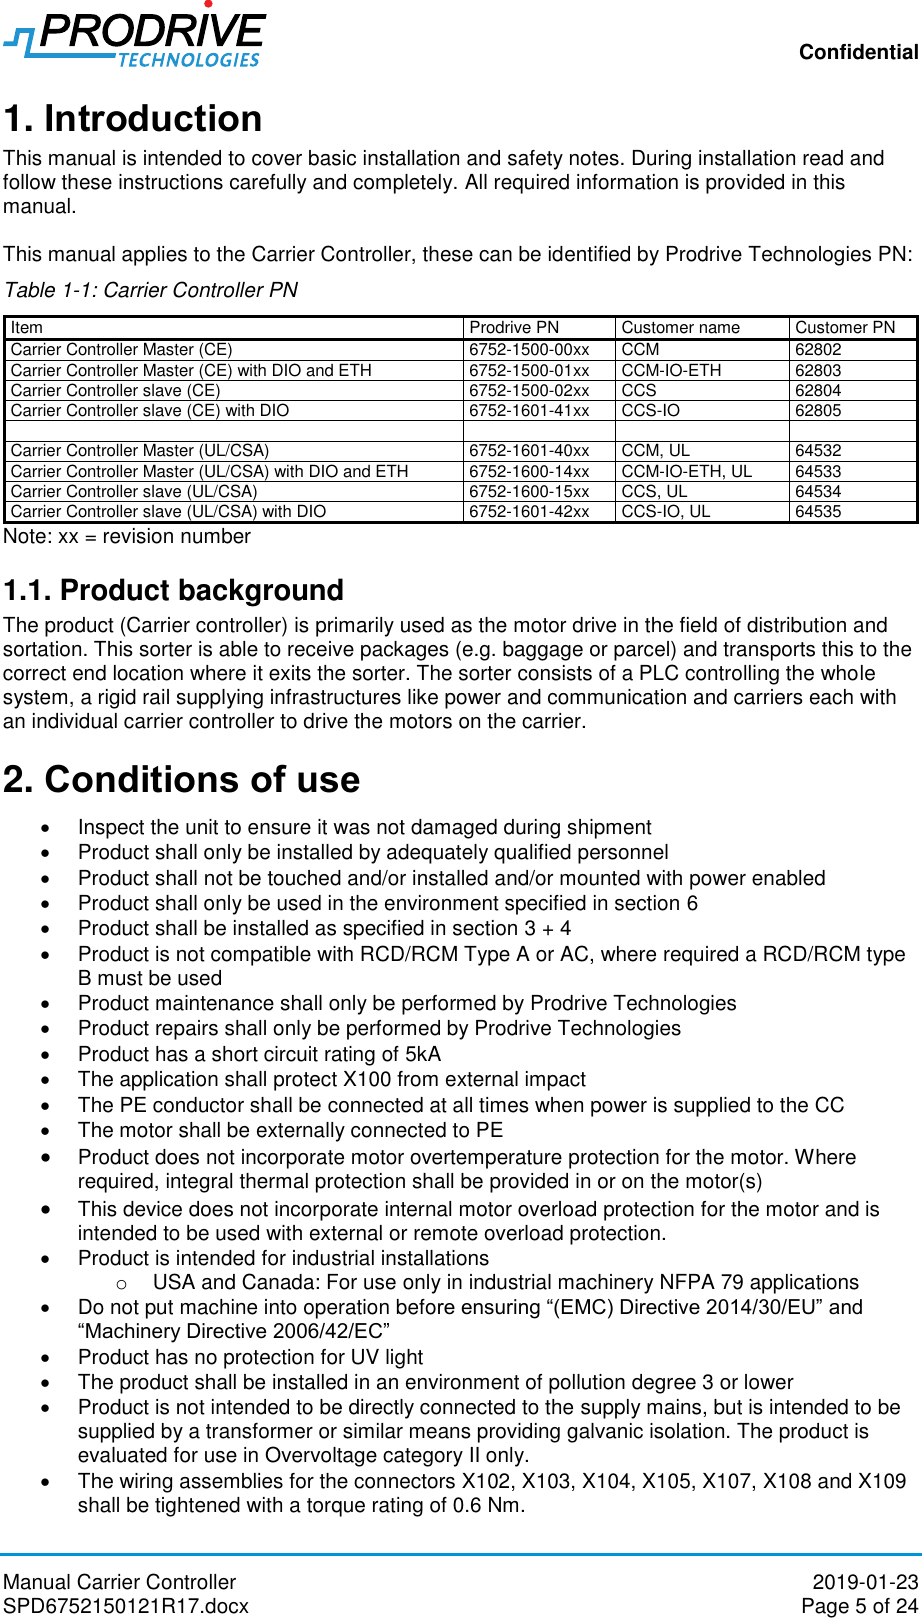 Confidential Manual Carrier Controller  2019-01-23 SPD6752150121R17.docx  Page 5 of 24 1. Introduction This manual is intended to cover basic installation and safety notes. During installation read and follow these instructions carefully and completely. All required information is provided in this manual.  This manual applies to the Carrier Controller, these can be identified by Prodrive Technologies PN: Table 1-1: Carrier Controller PN Item Prodrive PN Customer name Customer PN Carrier Controller Master (CE) 6752-1500-00xx CCM 62802 Carrier Controller Master (CE) with DIO and ETH  6752-1500-01xx CCM-IO-ETH 62803 Carrier Controller slave (CE) 6752-1500-02xx CCS 62804 Carrier Controller slave (CE) with DIO 6752-1601-41xx CCS-IO 62805     Carrier Controller Master (UL/CSA) 6752-1601-40xx CCM, UL 64532 Carrier Controller Master (UL/CSA) with DIO and ETH 6752-1600-14xx CCM-IO-ETH, UL 64533 Carrier Controller slave (UL/CSA) 6752-1600-15xx CCS, UL 64534 Carrier Controller slave (UL/CSA) with DIO 6752-1601-42xx CCS-IO, UL 64535 Note: xx = revision number 1.1. Product background The product (Carrier controller) is primarily used as the motor drive in the field of distribution and sortation. This sorter is able to receive packages (e.g. baggage or parcel) and transports this to the correct end location where it exits the sorter. The sorter consists of a PLC controlling the whole system, a rigid rail supplying infrastructures like power and communication and carriers each with an individual carrier controller to drive the motors on the carrier.  2. Conditions of use   Inspect the unit to ensure it was not damaged during shipment   Product shall only be installed by adequately qualified personnel   Product shall not be touched and/or installed and/or mounted with power enabled   Product shall only be used in the environment specified in section 6   Product shall be installed as specified in section 3 + 4   Product is not compatible with RCD/RCM Type A or AC, where required a RCD/RCM type B must be used    Product maintenance shall only be performed by Prodrive Technologies   Product repairs shall only be performed by Prodrive Technologies   Product has a short circuit rating of 5kA   The application shall protect X100 from external impact   The PE conductor shall be connected at all times when power is supplied to the CC   The motor shall be externally connected to PE  Product does not incorporate motor overtemperature protection for the motor. Where required, integral thermal protection shall be provided in or on the motor(s)  This device does not incorporate internal motor overload protection for the motor and is intended to be used with external or remote overload protection.   Product is intended for industrial installations o  USA and Canada: For use only in industrial machinery NFPA 79 applications   Do not put machine into operation before ensuring “(EMC) Directive 2014/30/EU” and “Machinery Directive 2006/42/EC”   Product has no protection for UV light   The product shall be installed in an environment of pollution degree 3 or lower   Product is not intended to be directly connected to the supply mains, but is intended to be supplied by a transformer or similar means providing galvanic isolation. The product is evaluated for use in Overvoltage category II only.   The wiring assemblies for the connectors X102, X103, X104, X105, X107, X108 and X109 shall be tightened with a torque rating of 0.6 Nm. 